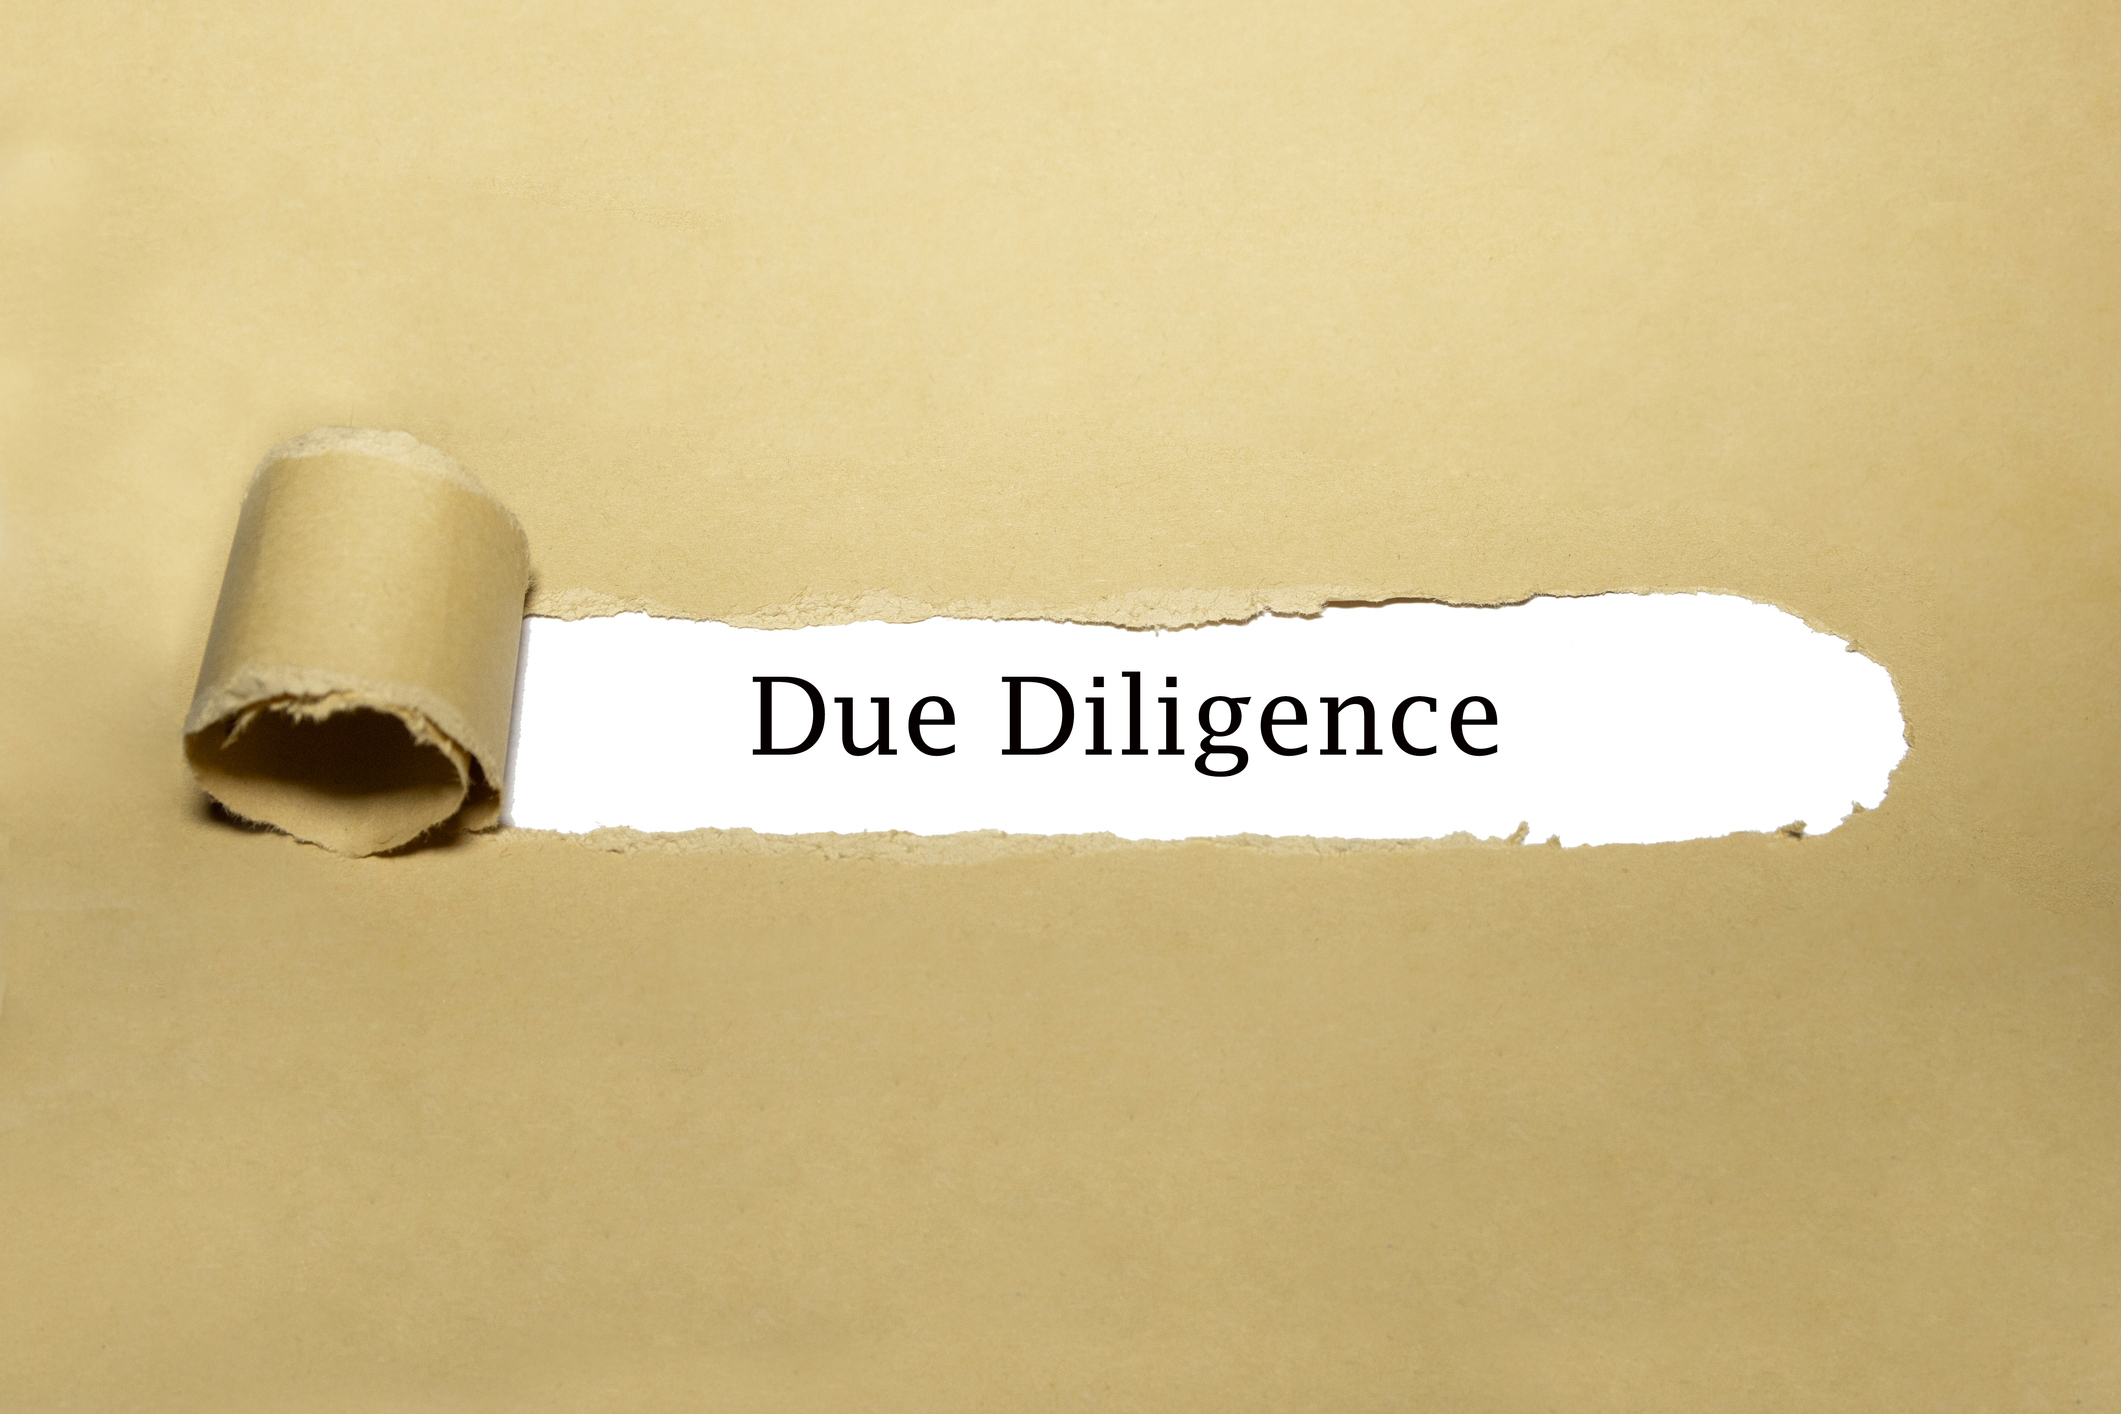 Paper torn to reveal the words 'due diligence'